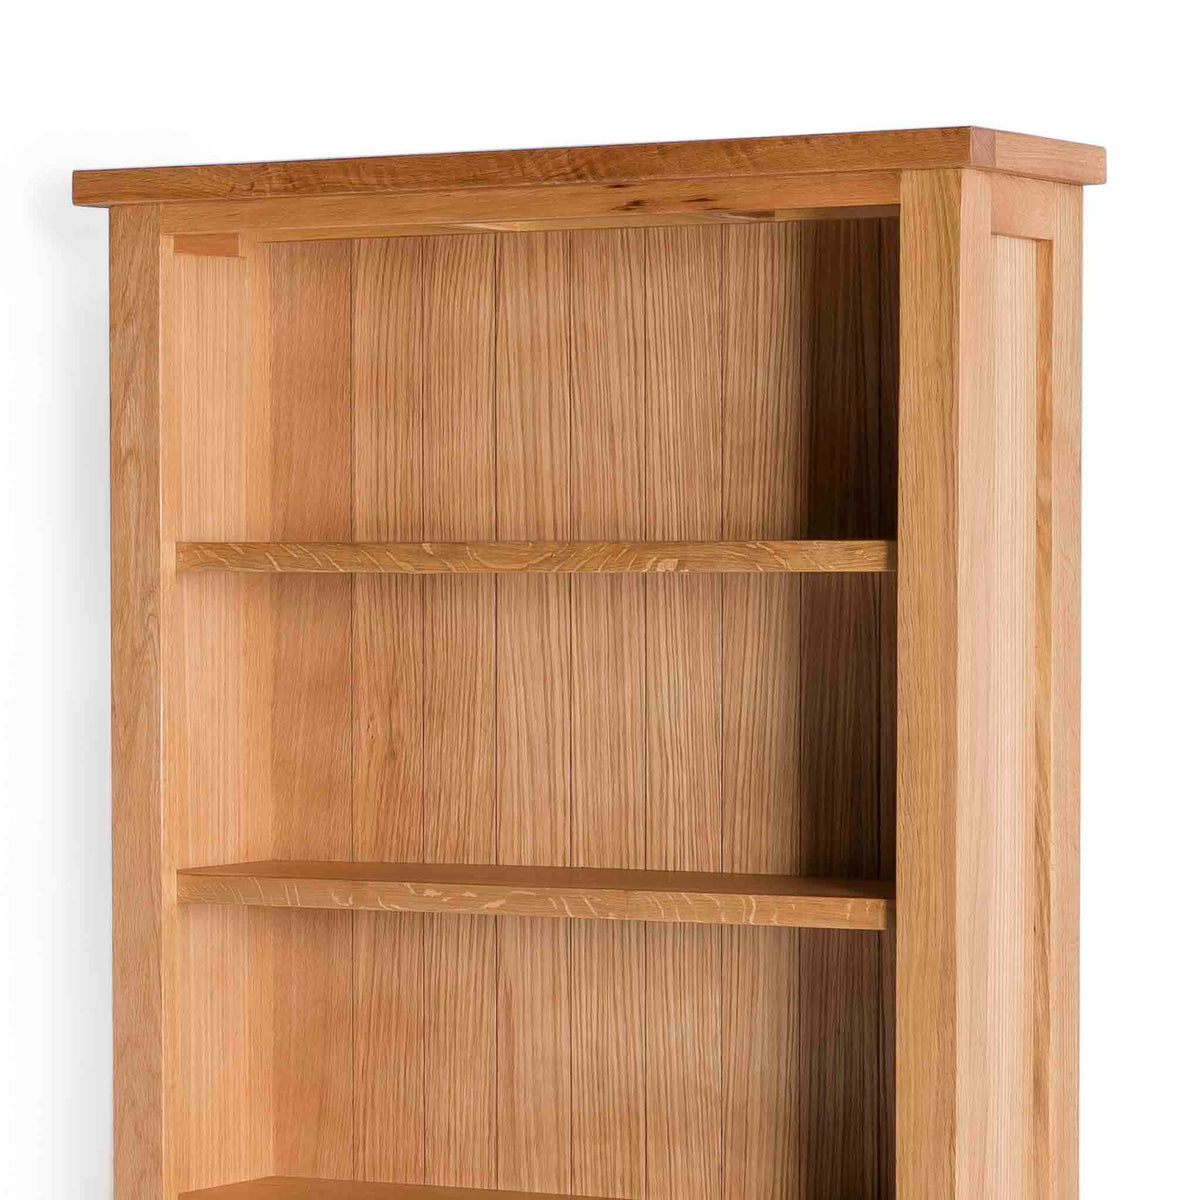 London Oak Large Bookcase - Close up of top of bookcase